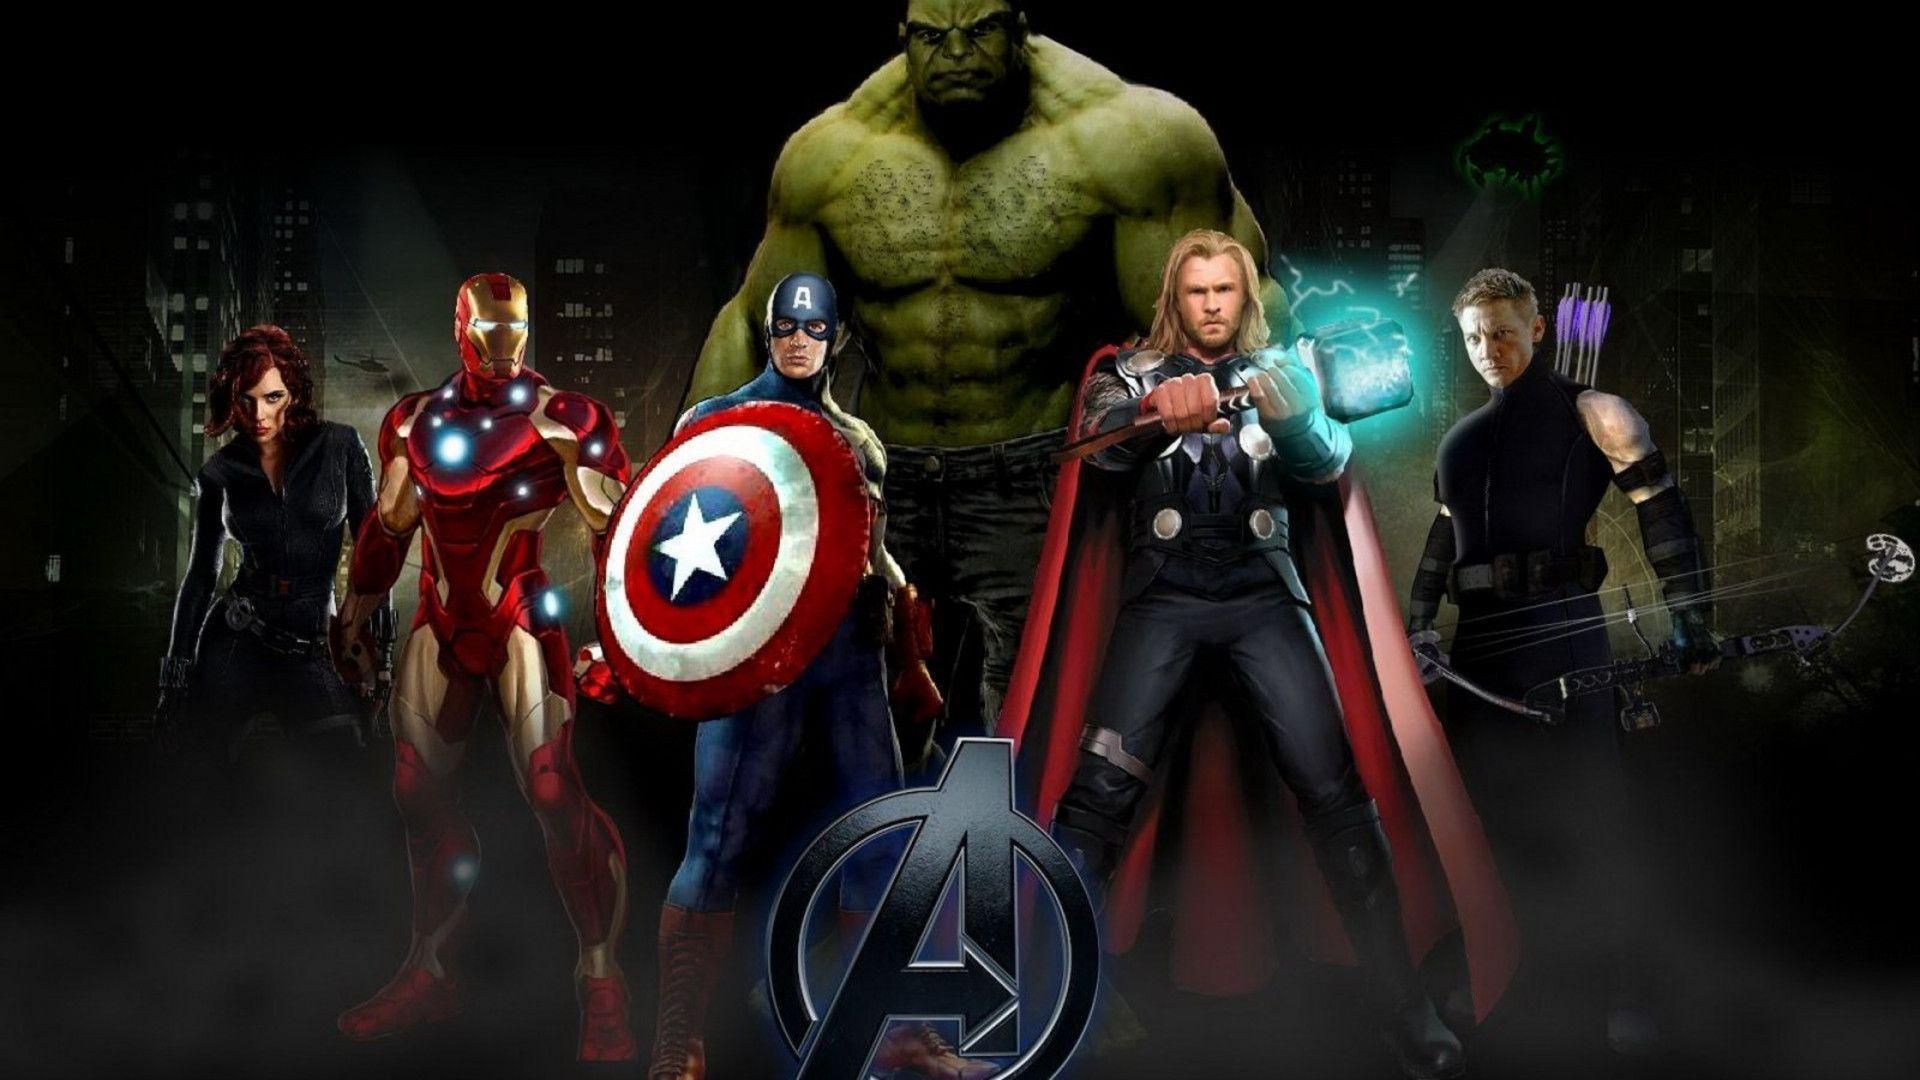 Avengers 1920x1080 Wallpapers - Top Free Avengers 1920x1080 Backgrounds